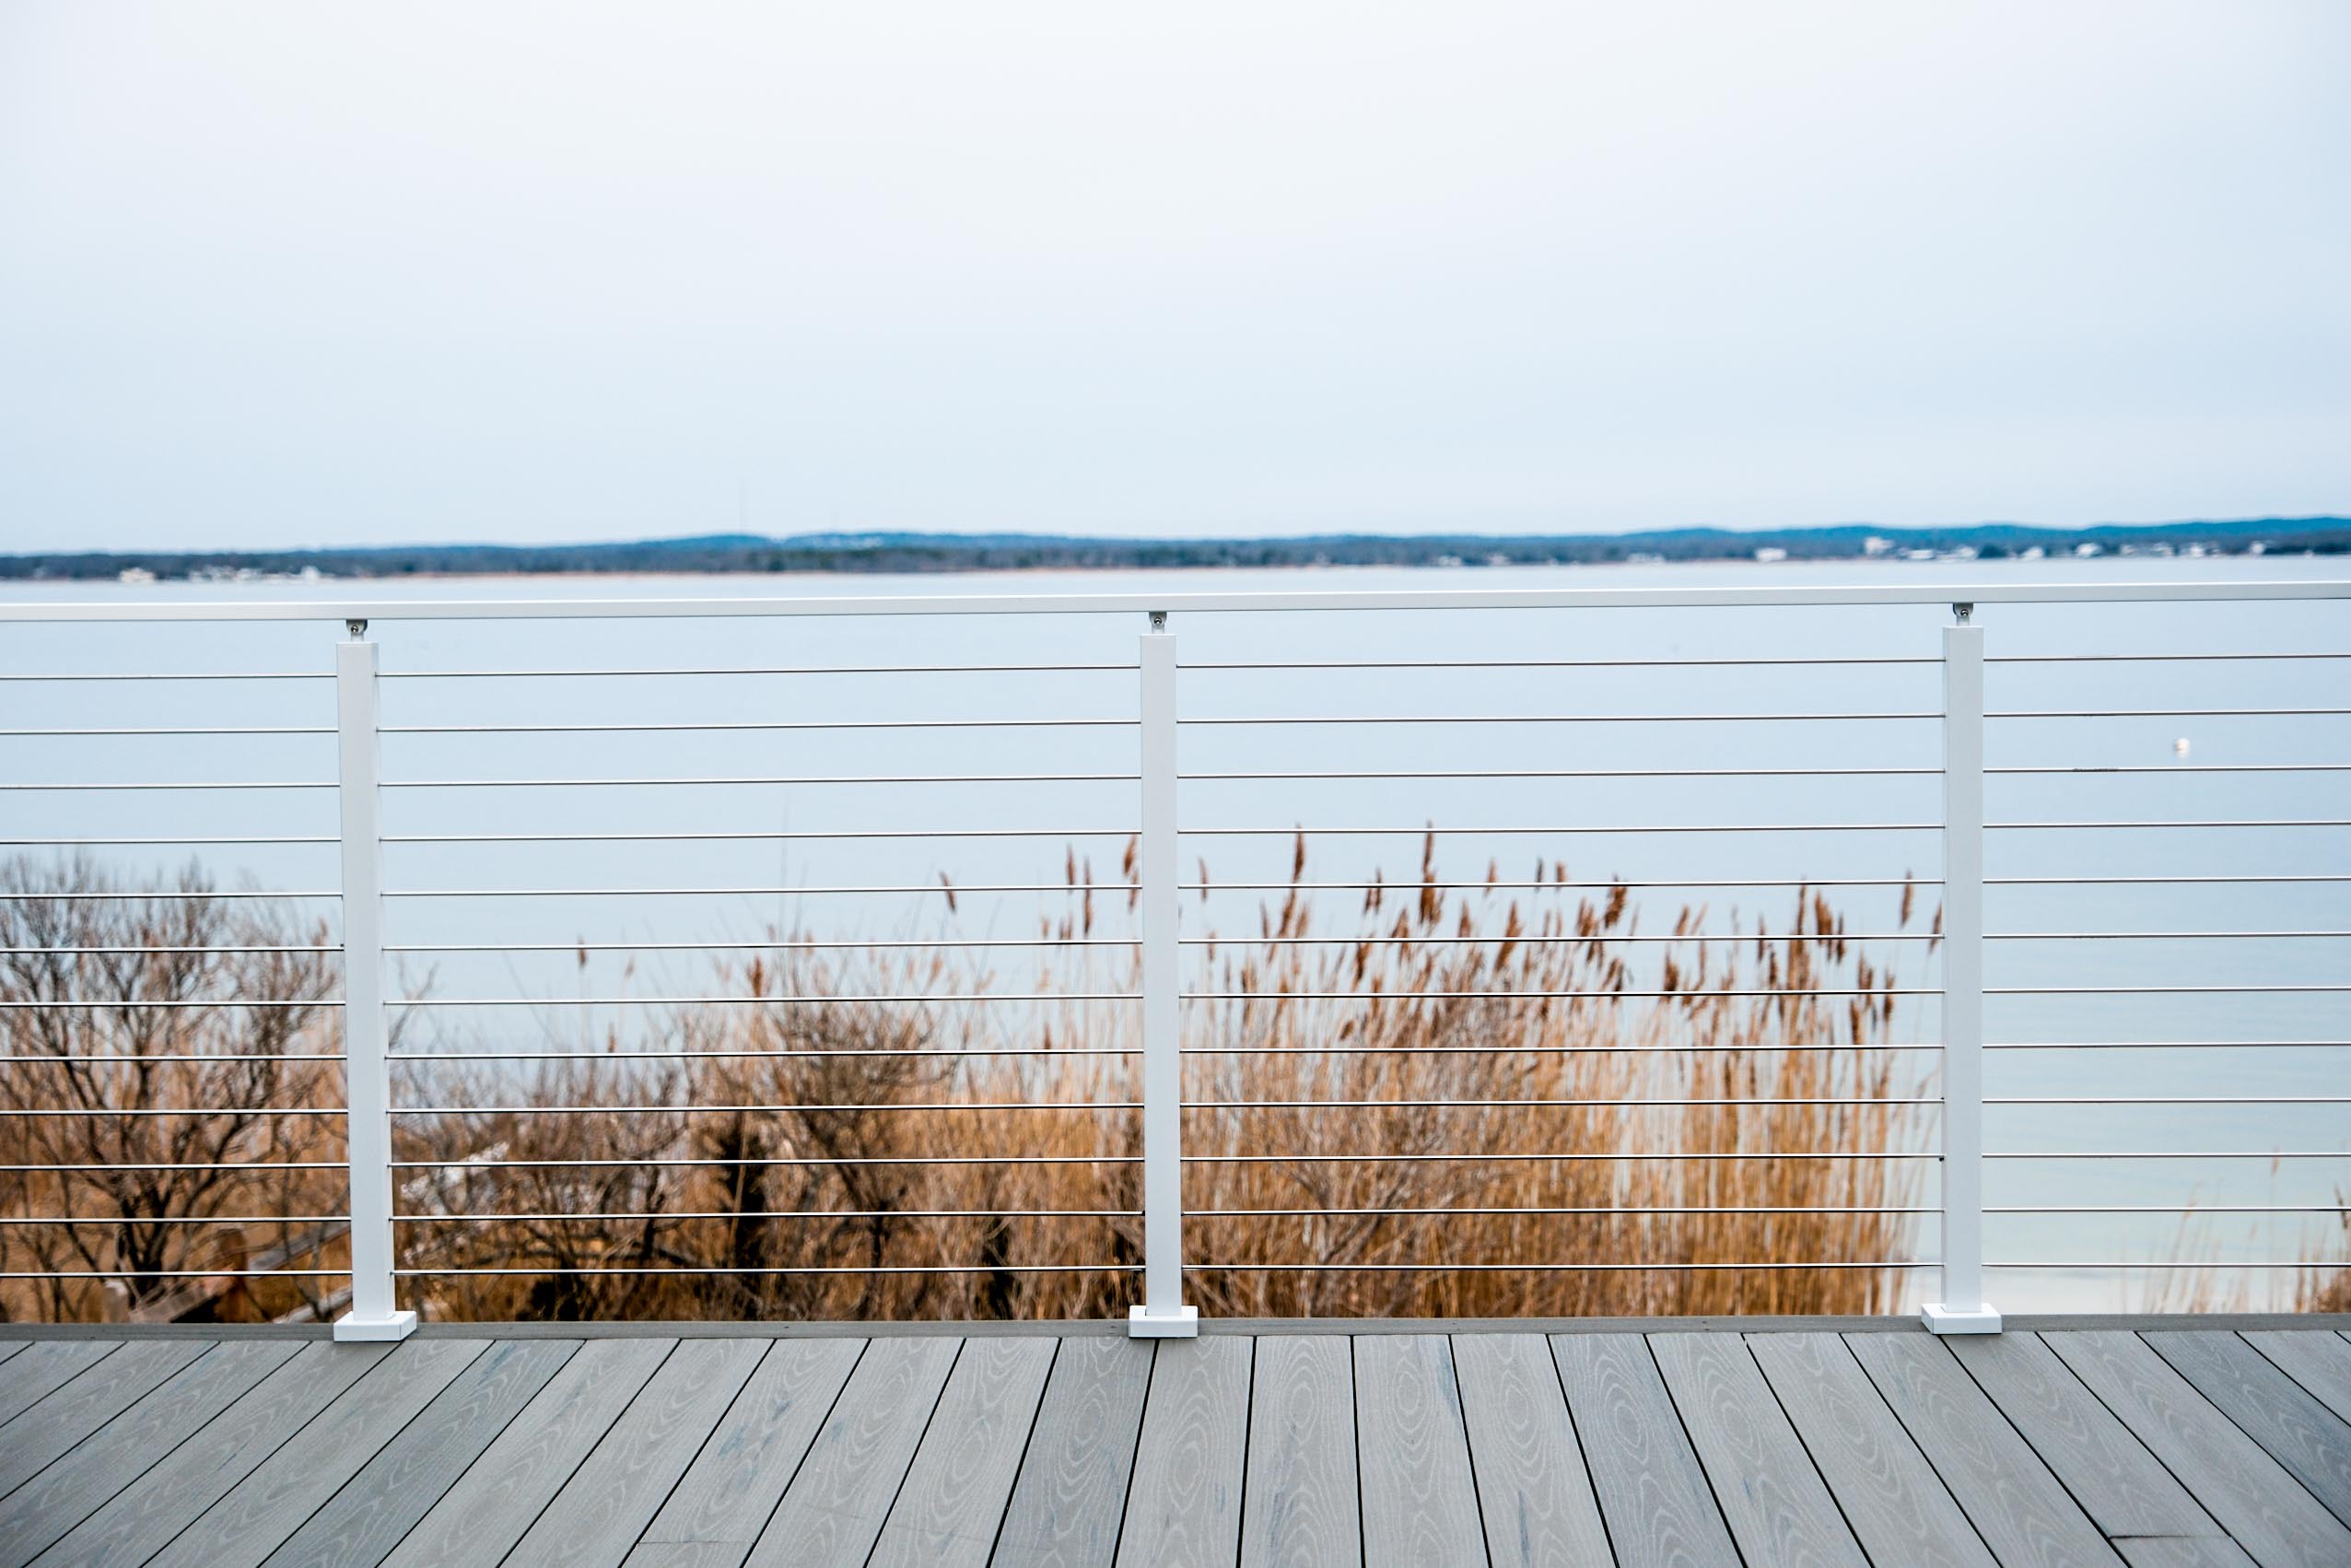 DIY Cable Railing for Decks: The Ultimate Guide